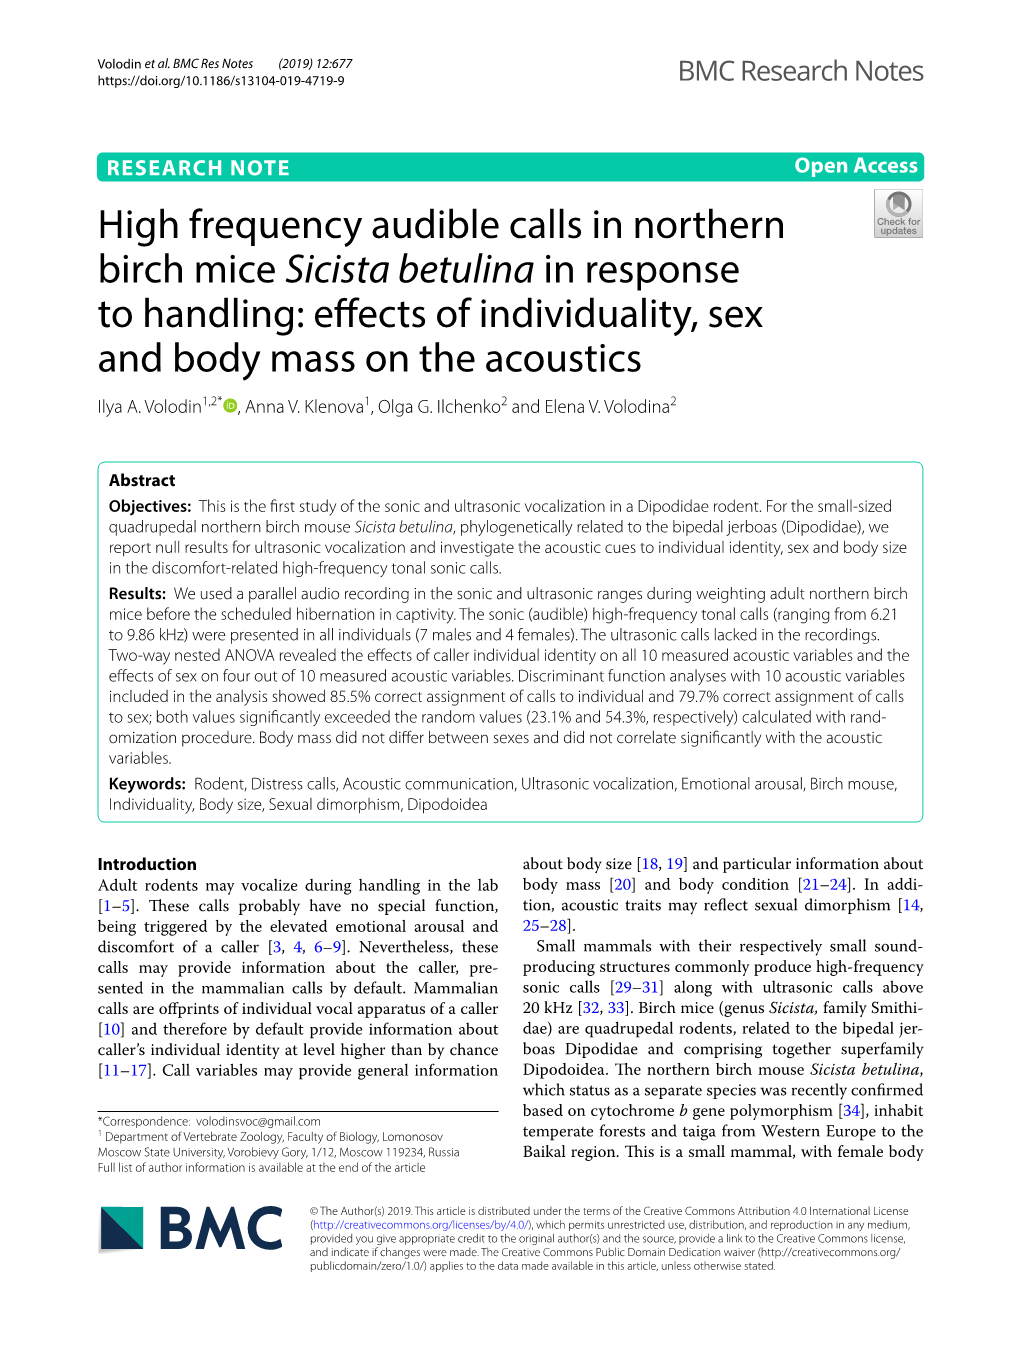 High Frequency Audible Calls in Northern Birch Mice Sicista Betulina in Response to Handling: Efects of Individuality, Sex and Body Mass on the Acoustics Ilya A